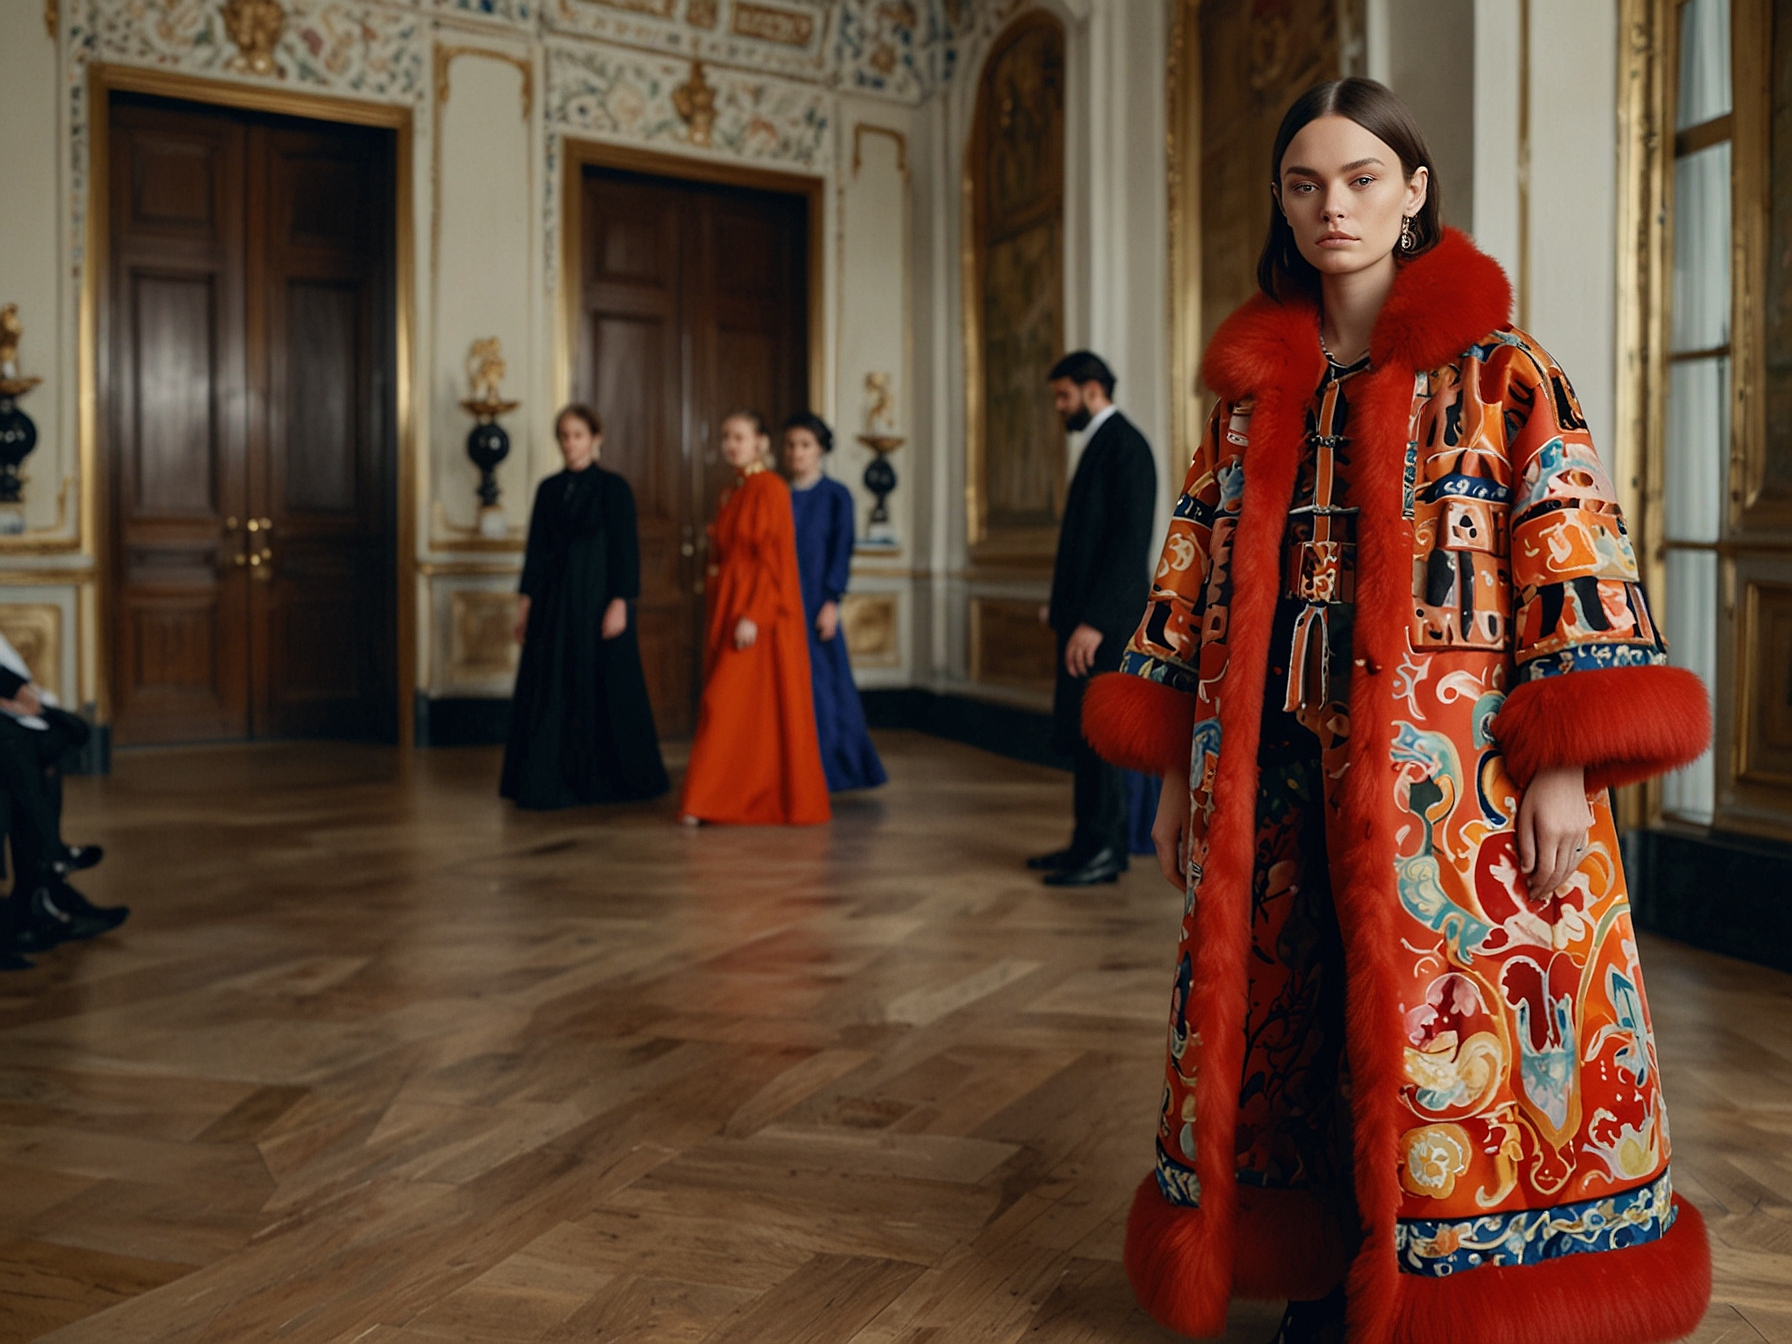 Alessandro Michele's Valentino Resort 2025 Collection showcases an ornate ensemble with vibrant patterns, rich textures, and fur-trimmed large coats, exemplifying maximalist aesthetics.